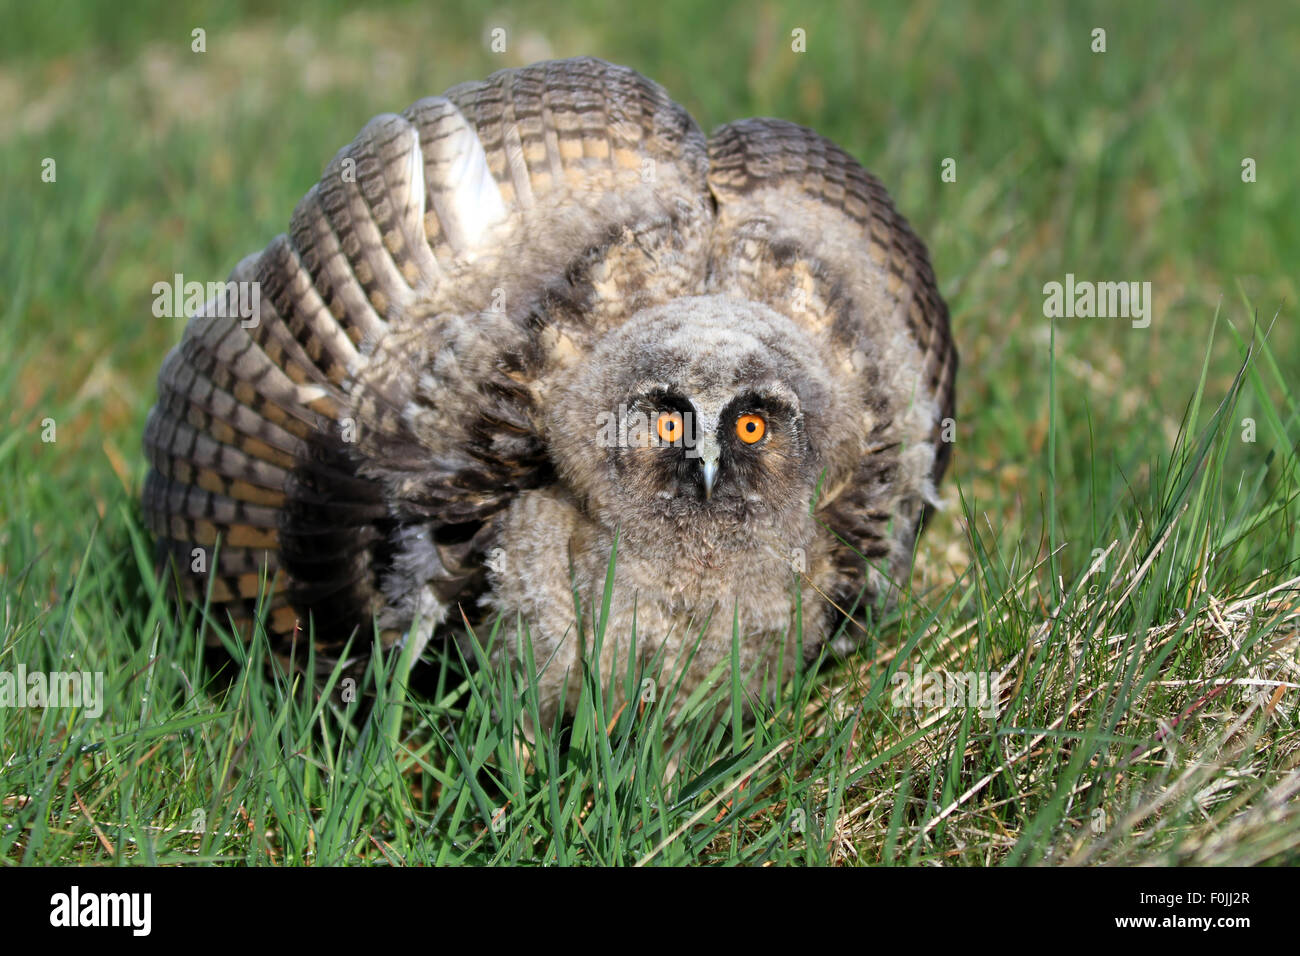 A Natural, Wild Long-eared Owlet (Asio otus) portrait. Showing display posture. Taken in the Angus Glens, Scotland, UK. Stock Photo